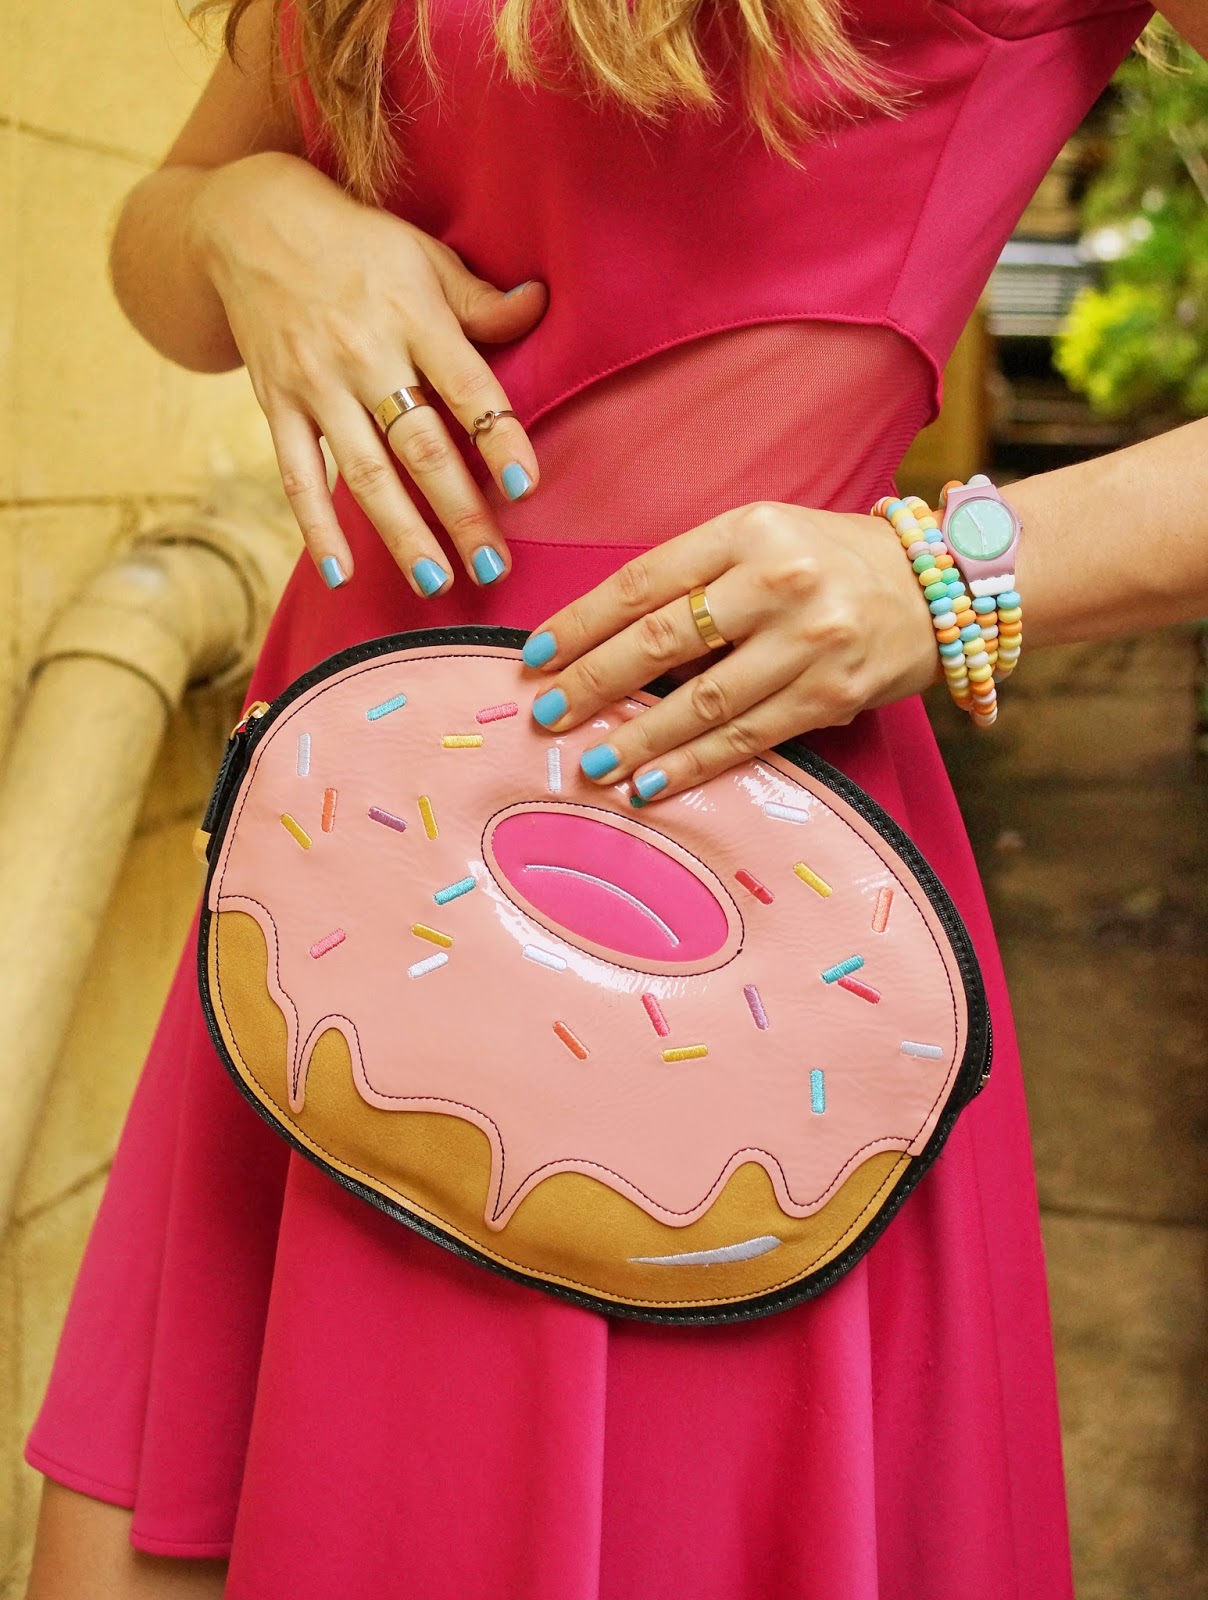 The perfect Clutch to celebrate Donut Day! Adorbs!